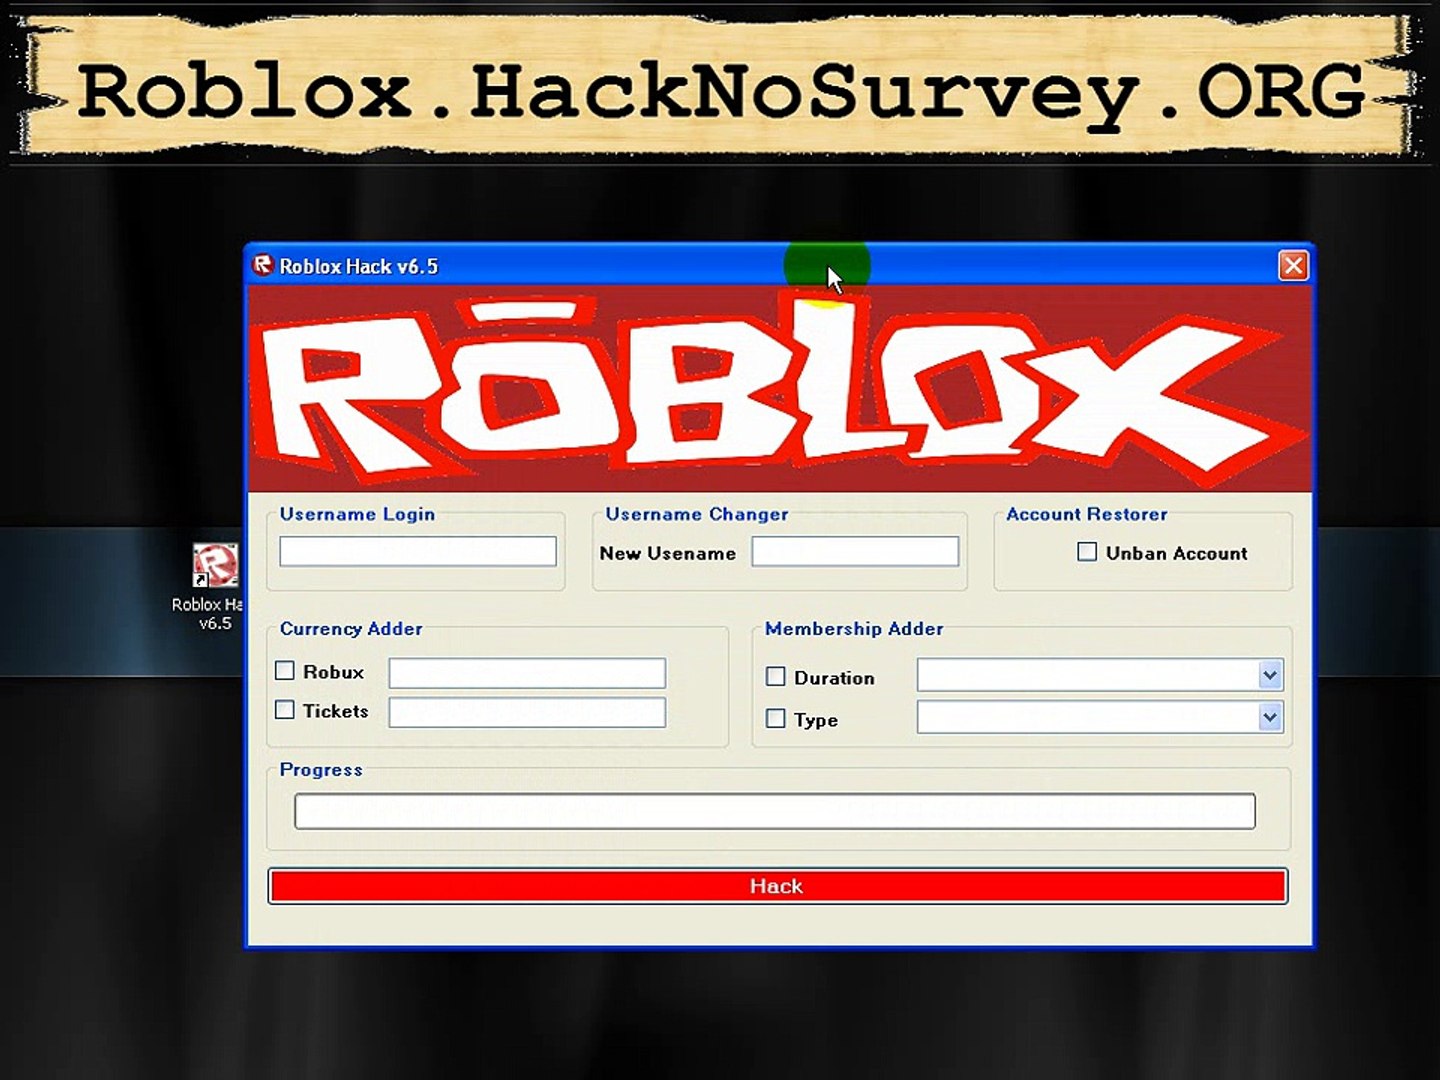 Roblox Hack 2015 Roblox Robux Hack Generator 2015 Membership Hack Video Dailymotion - get free robux on roblox 2017 hack robux cheat engine 6 1